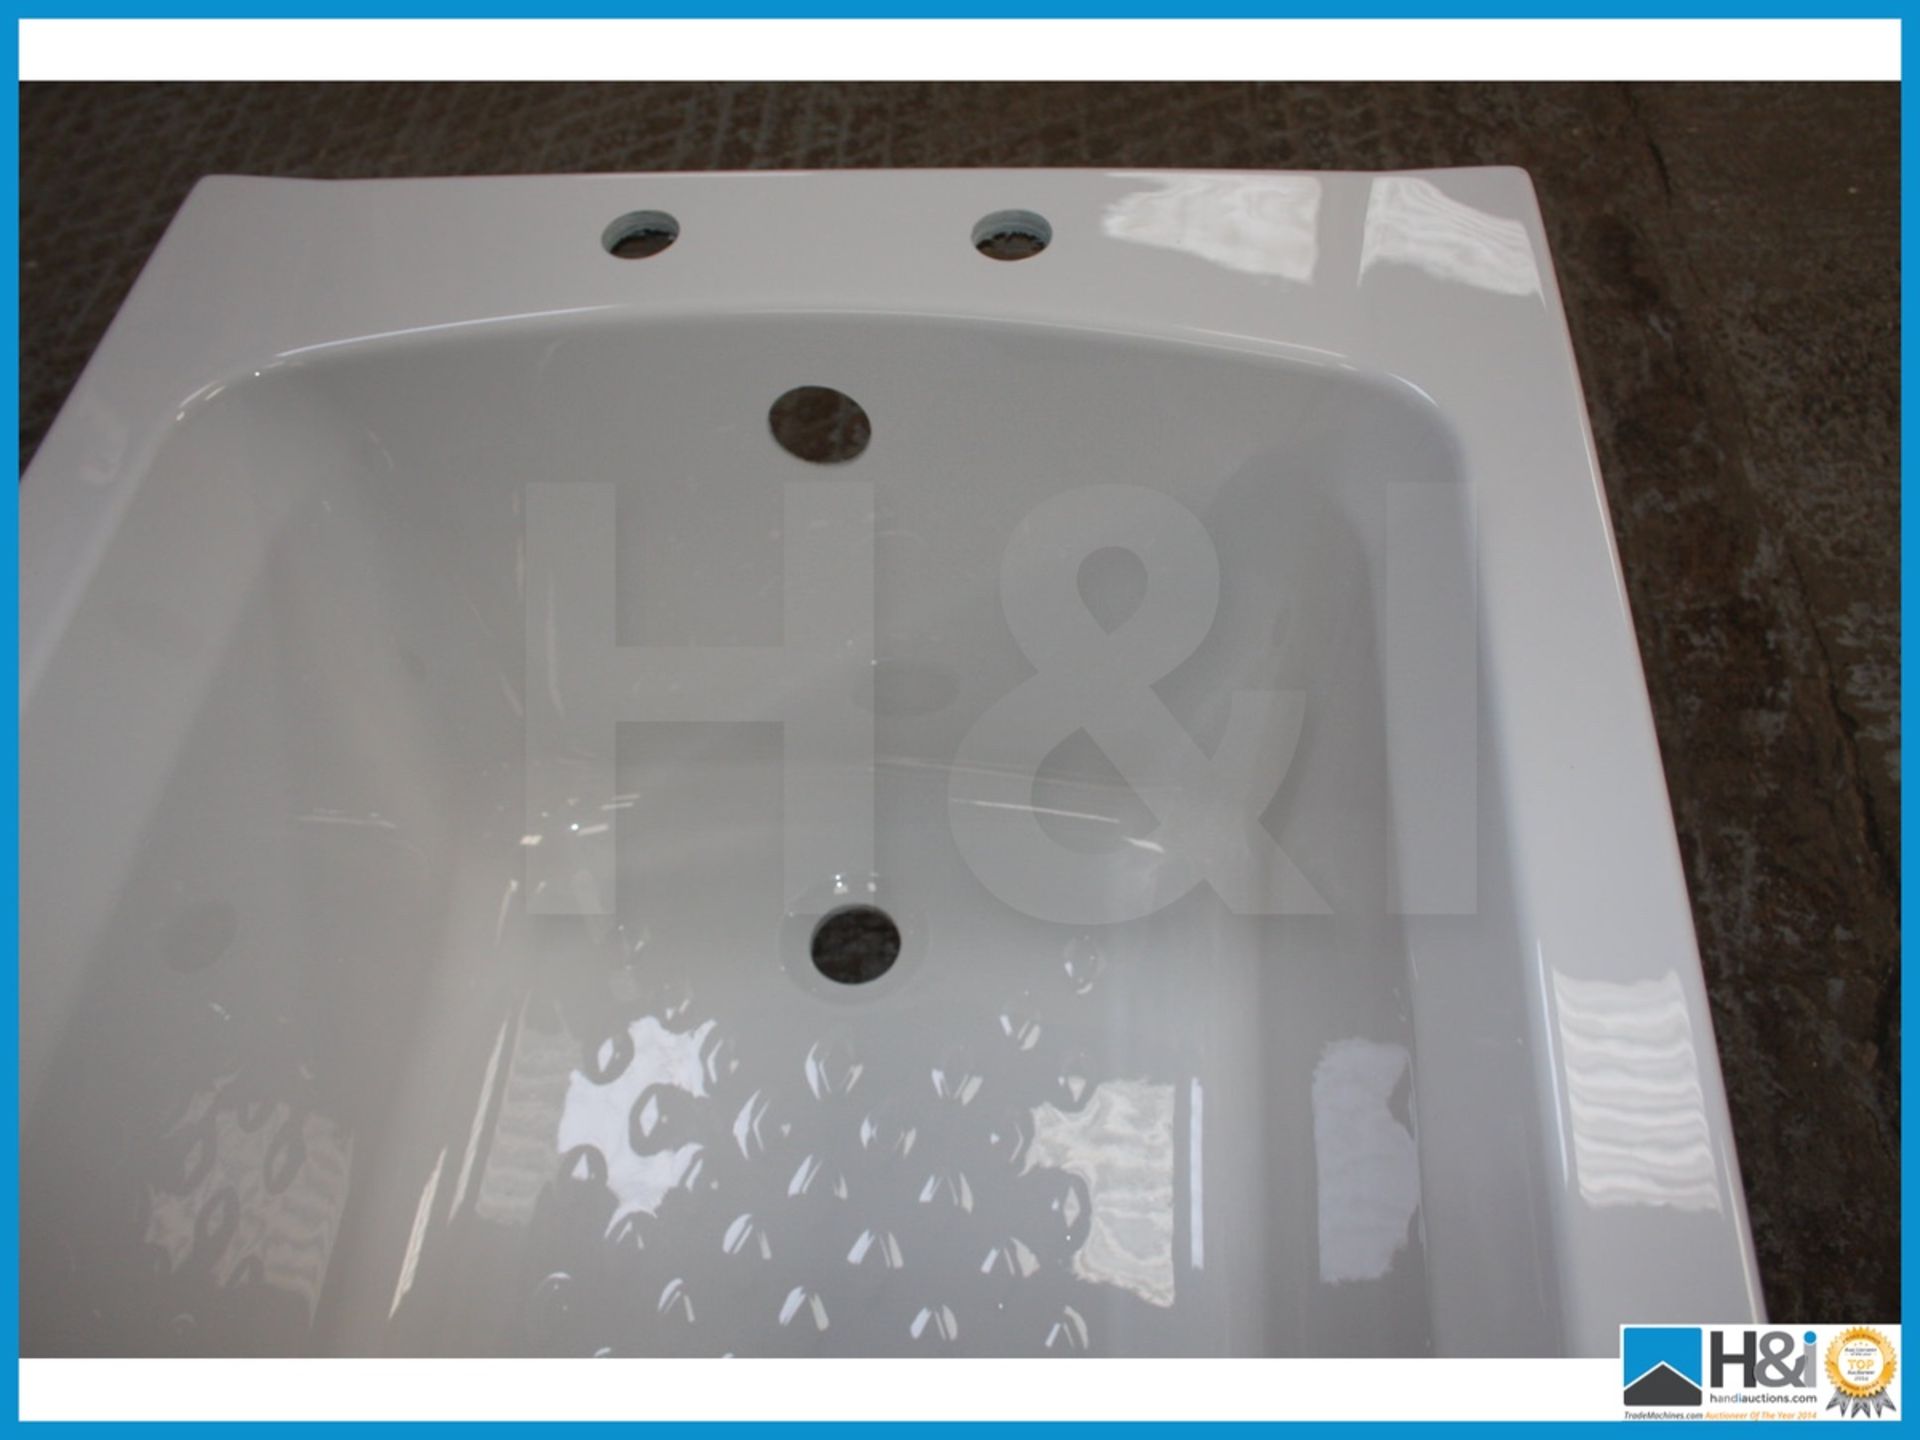 Jacuzzi elatus 1685 x 685 2 tap hole chrome grips new boxed rrp œ899 Appraisal: Viewing Essential - Image 2 of 5